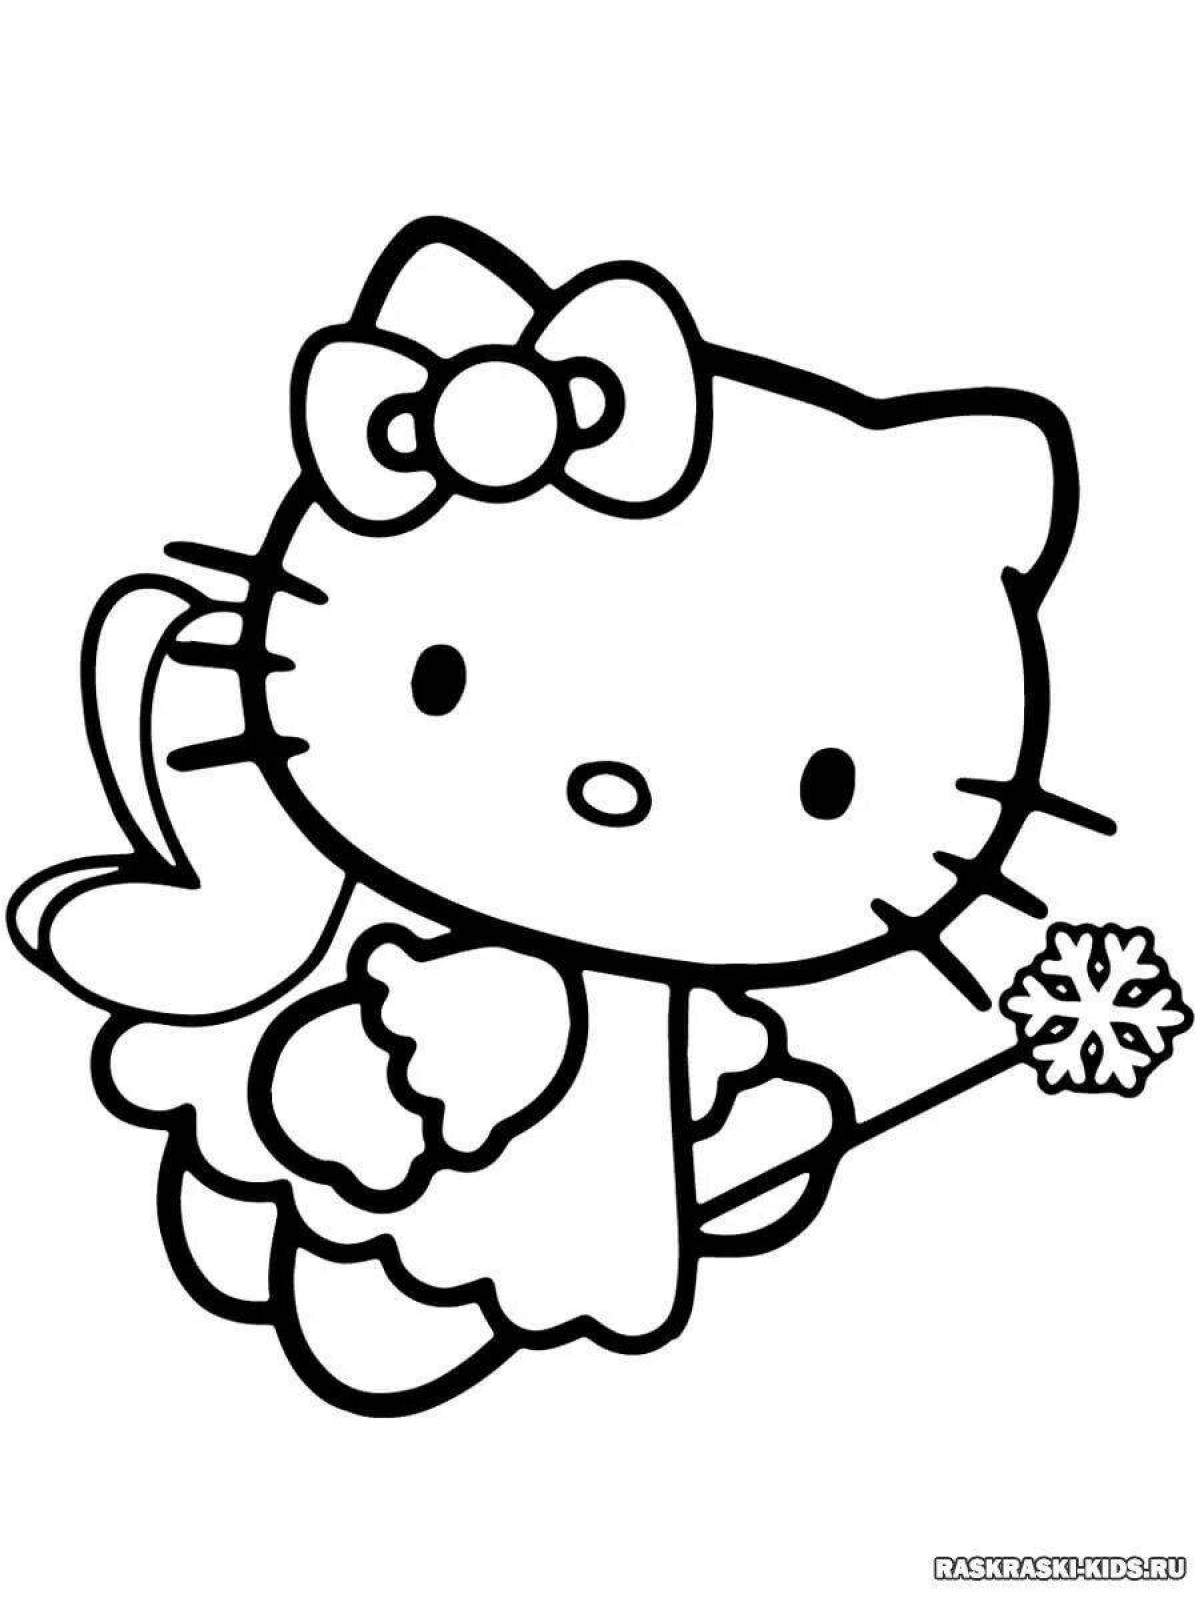 Colorific hello kitty game coloring page